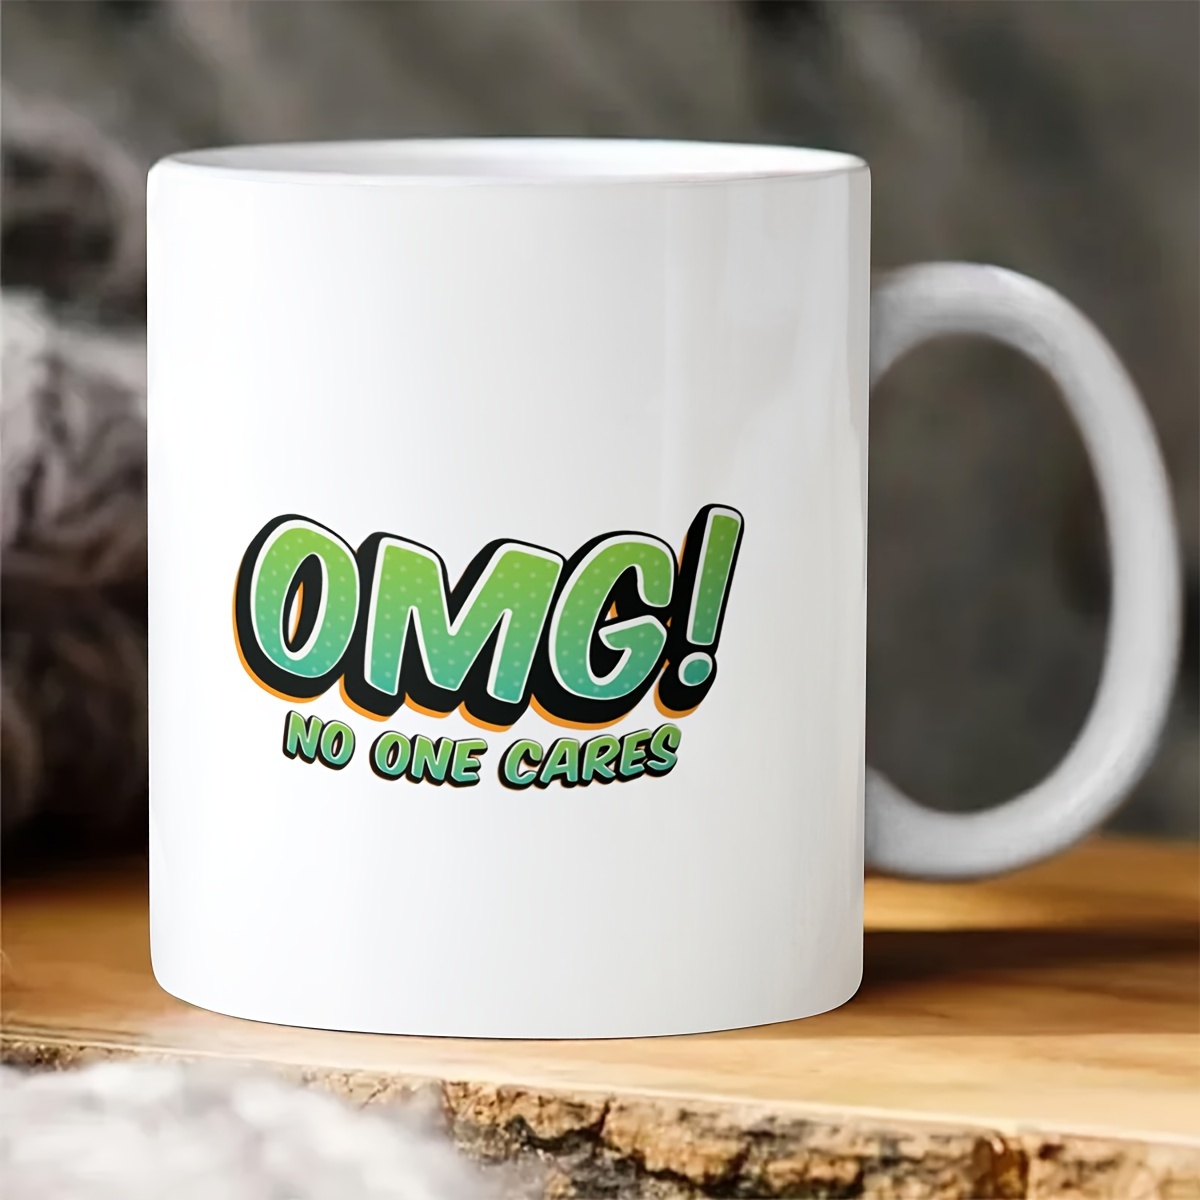 Funny Mug - Yet, Despite The Look on My Face, You're Still Talking - 11 oz Coffee Mugs - Inspirational Gifts and Sarcasm